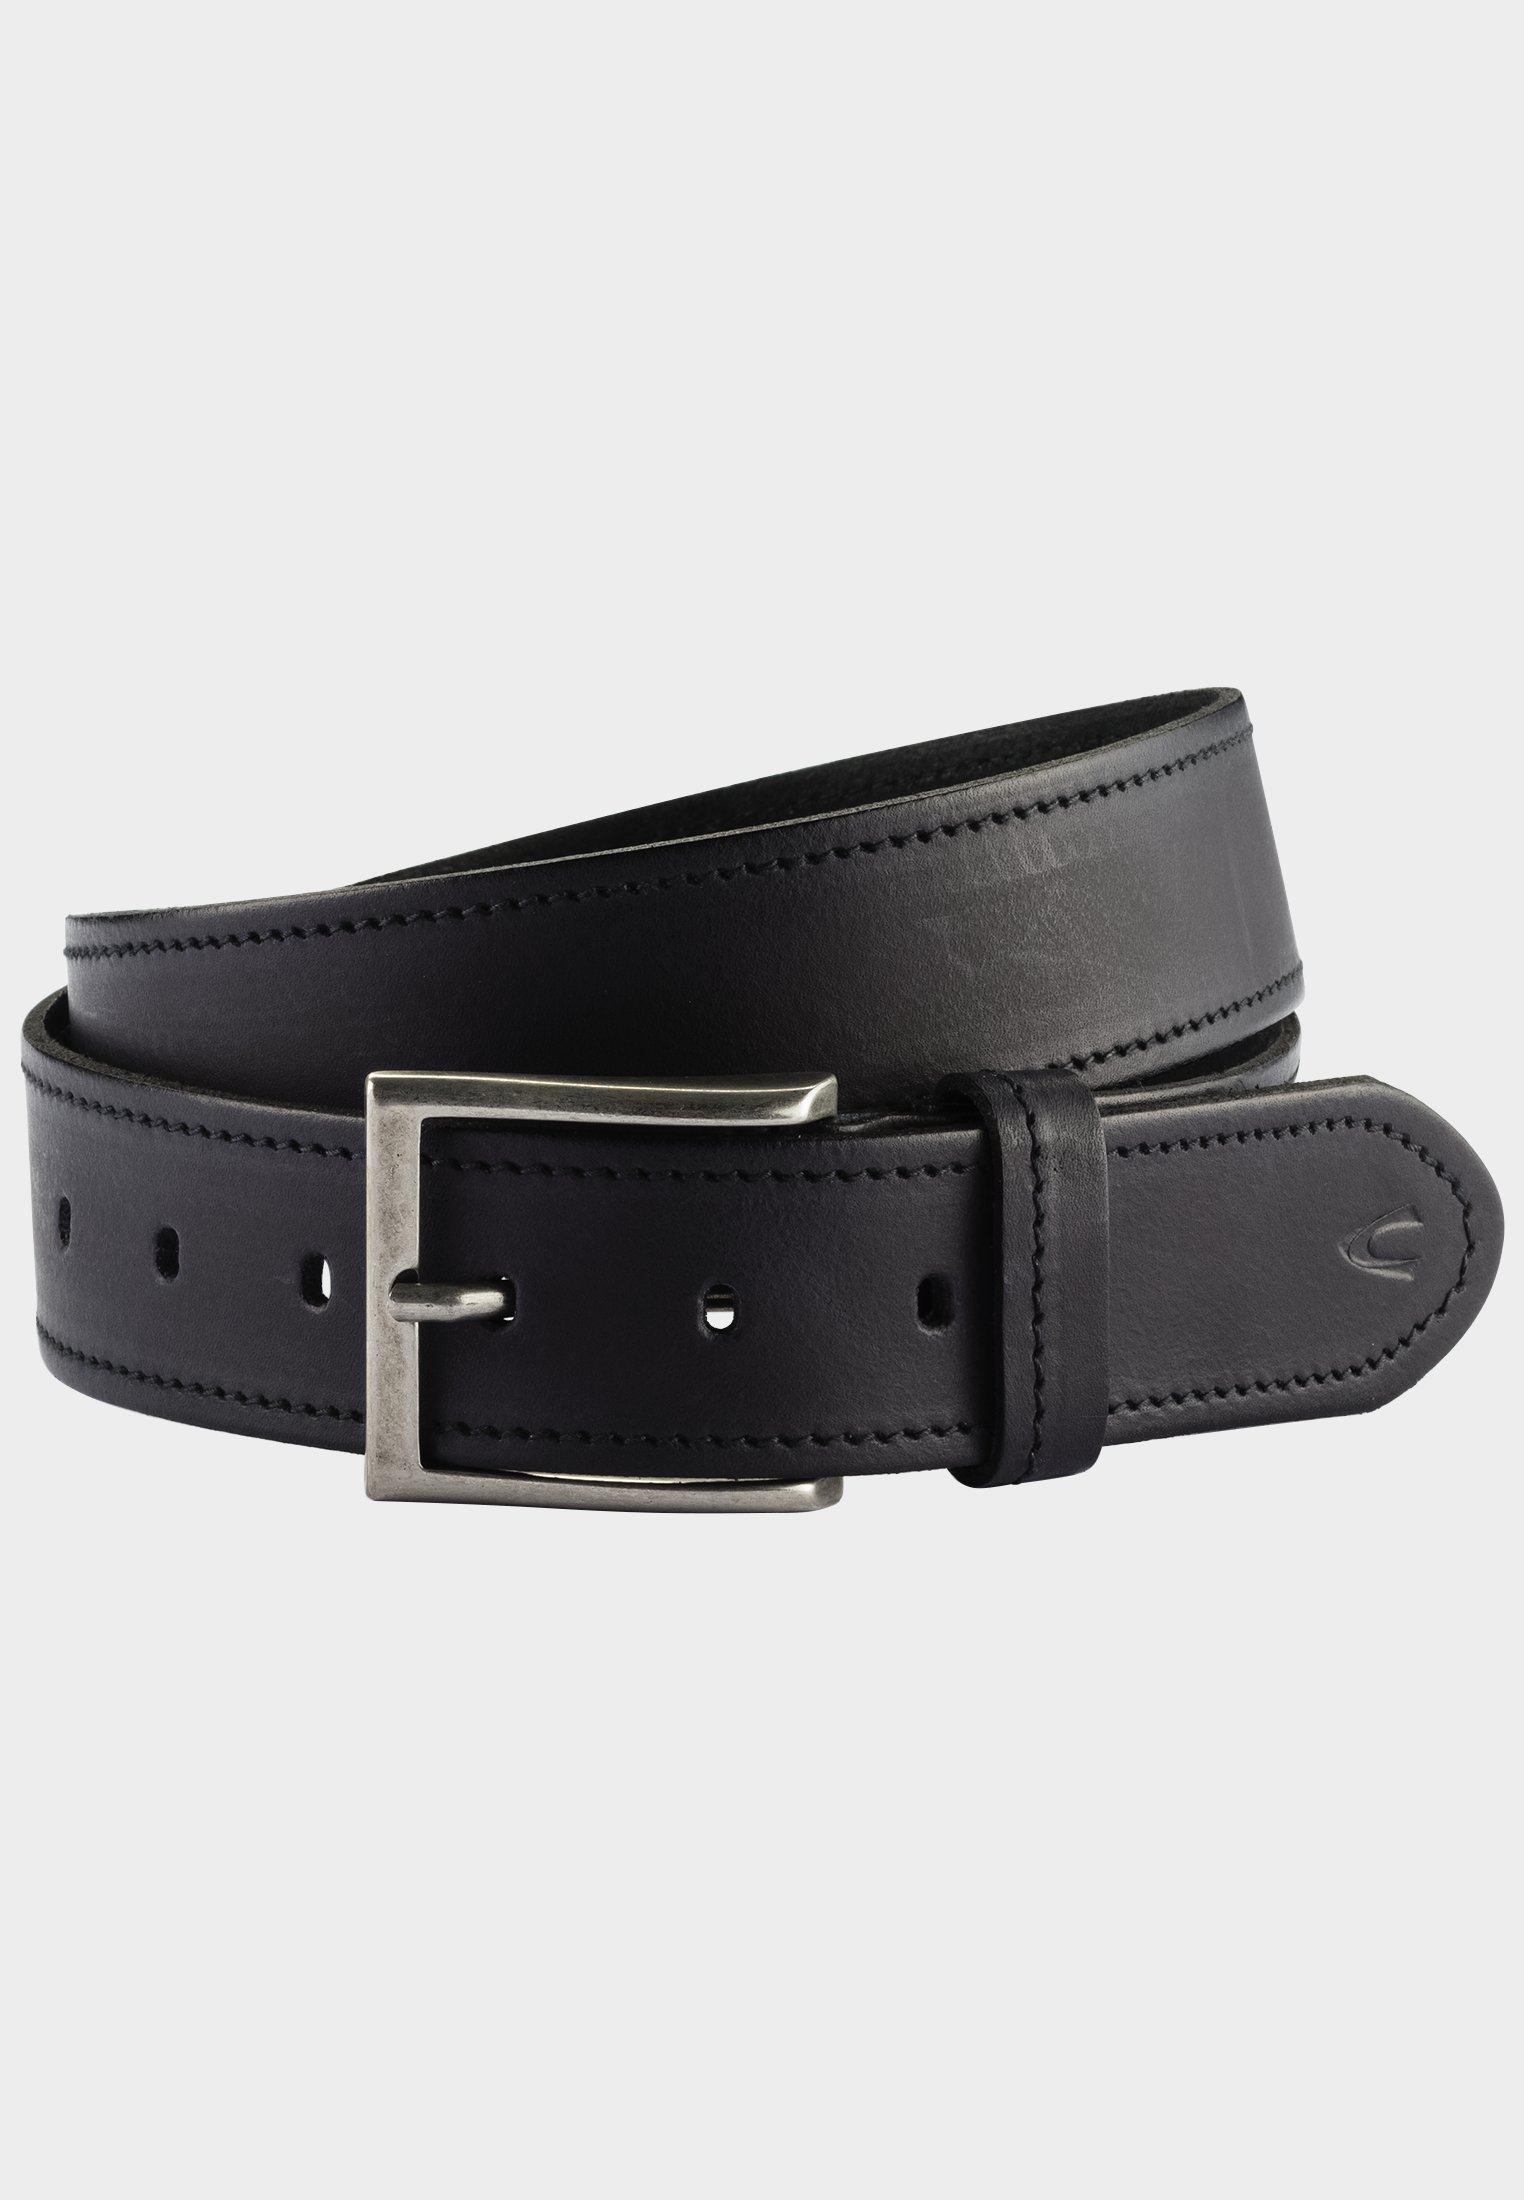 Camel Active Belt made of high quality leather